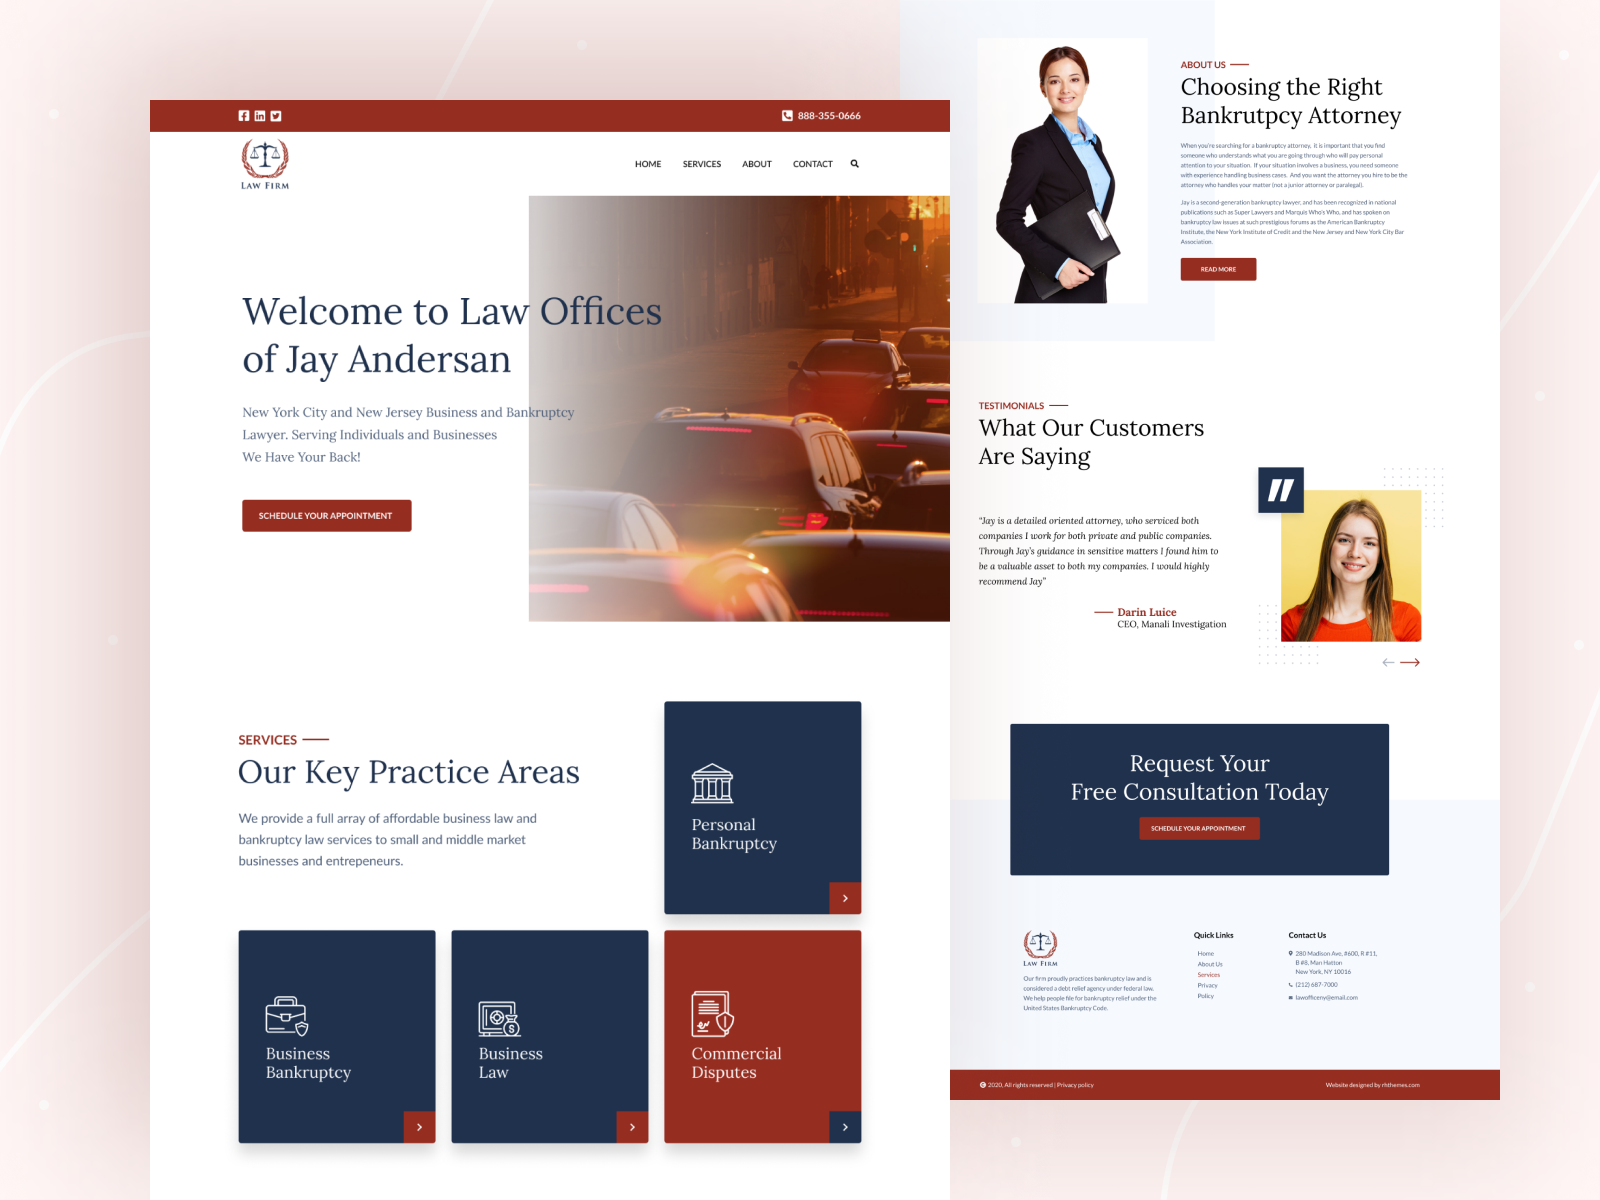 You Can Depend On 20 Best Law Firm Website Design Ideas